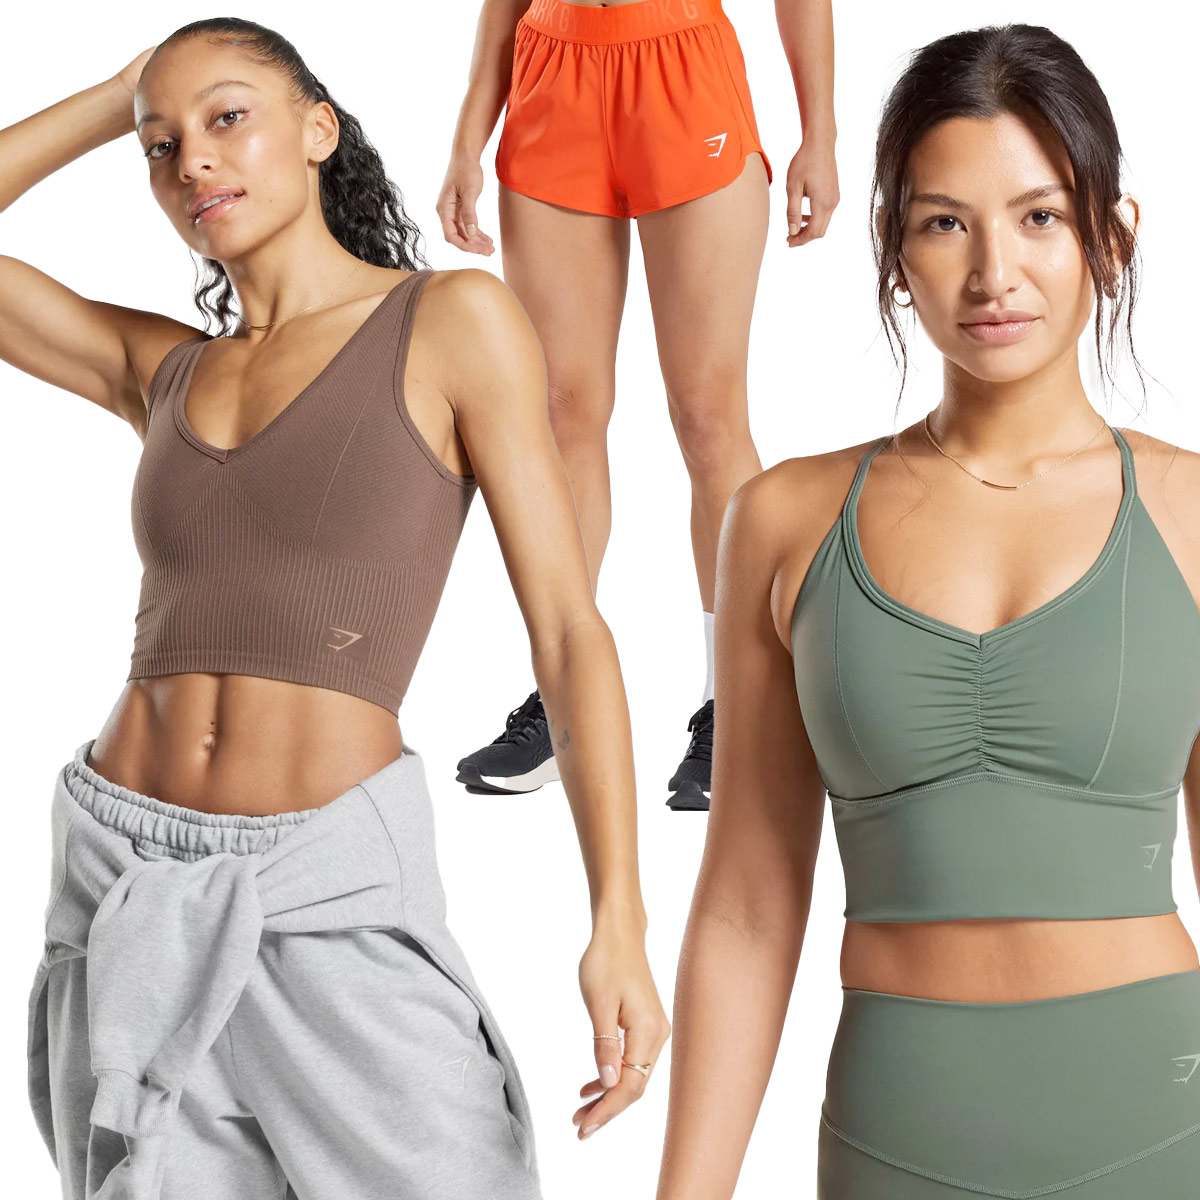 Score Stylish Sportswear Starting as $14 With Gymshark's 60% Off Sale